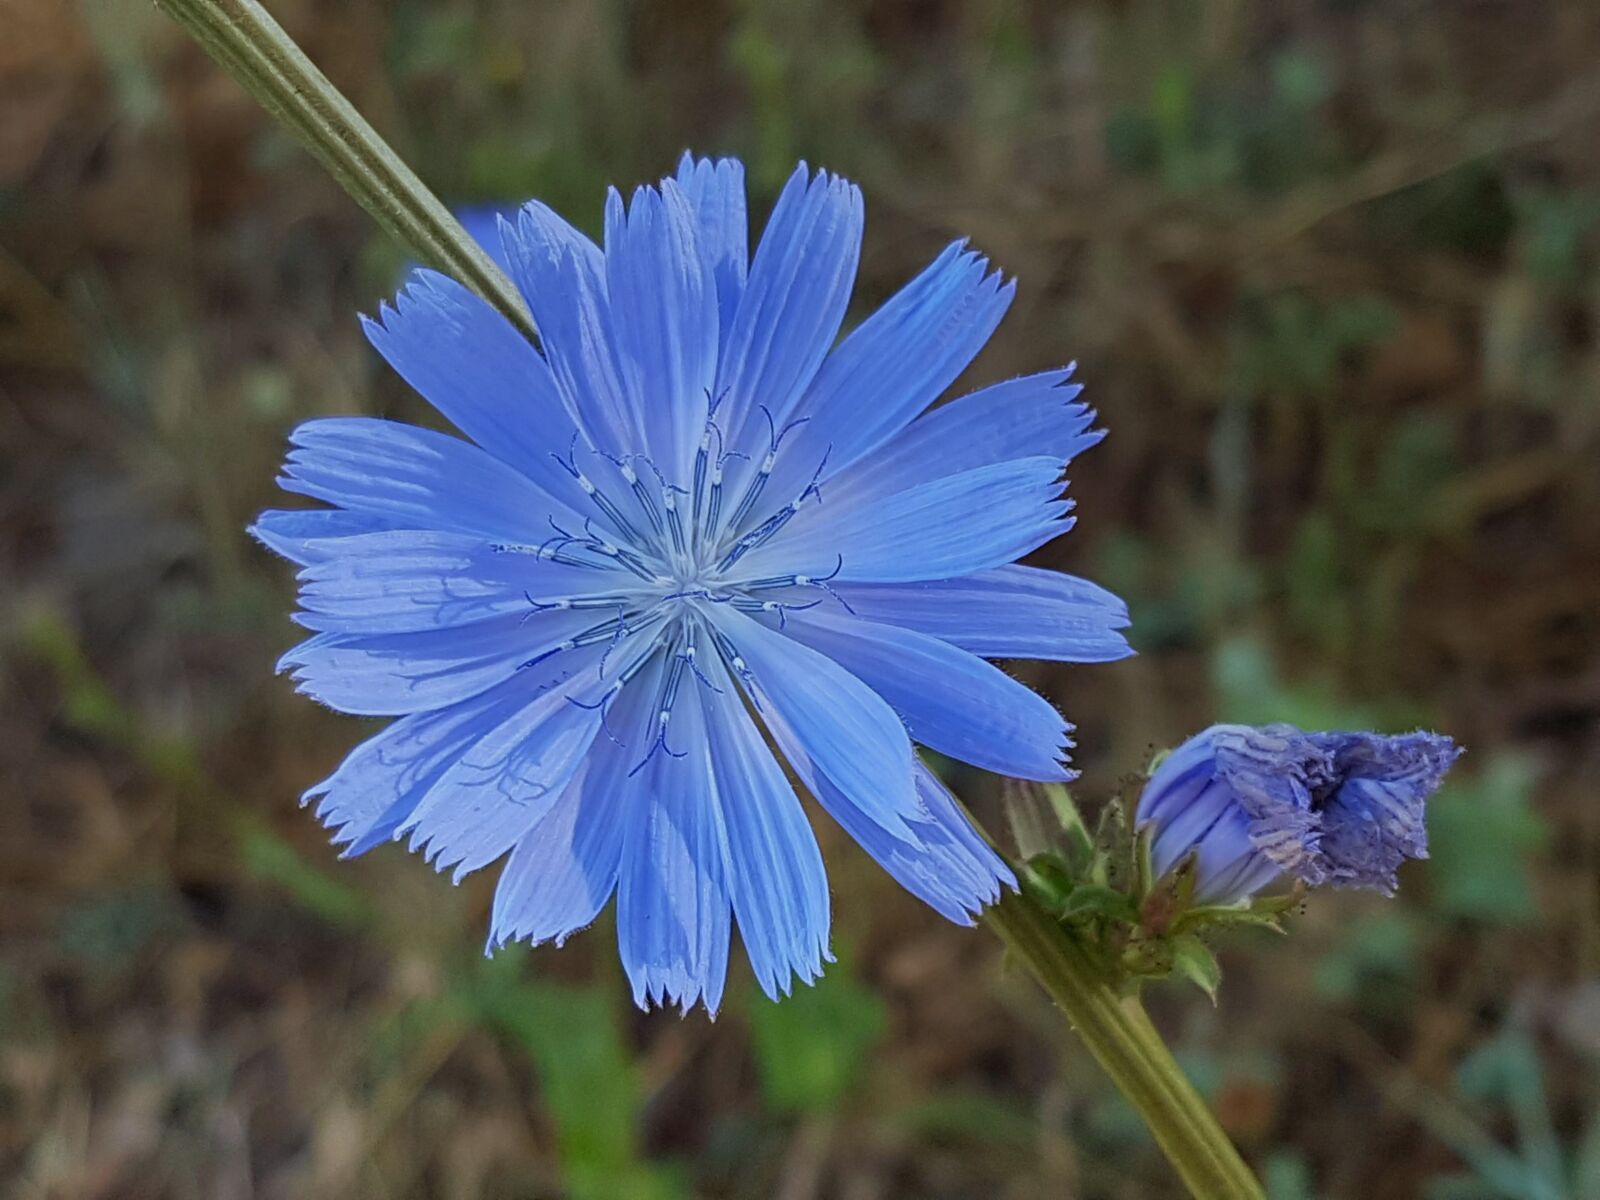 Samsung Galaxy S7 sample photo. Flower, blue, nature photography